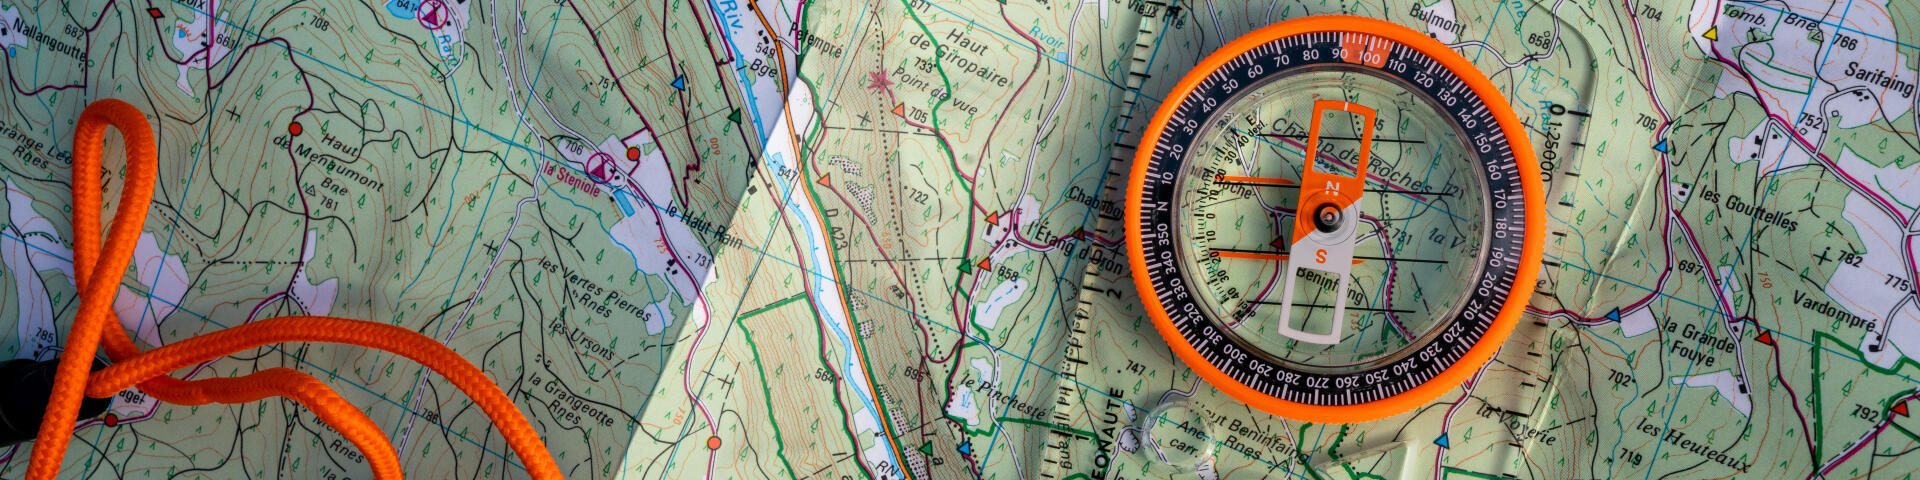 Hiking map with a compass